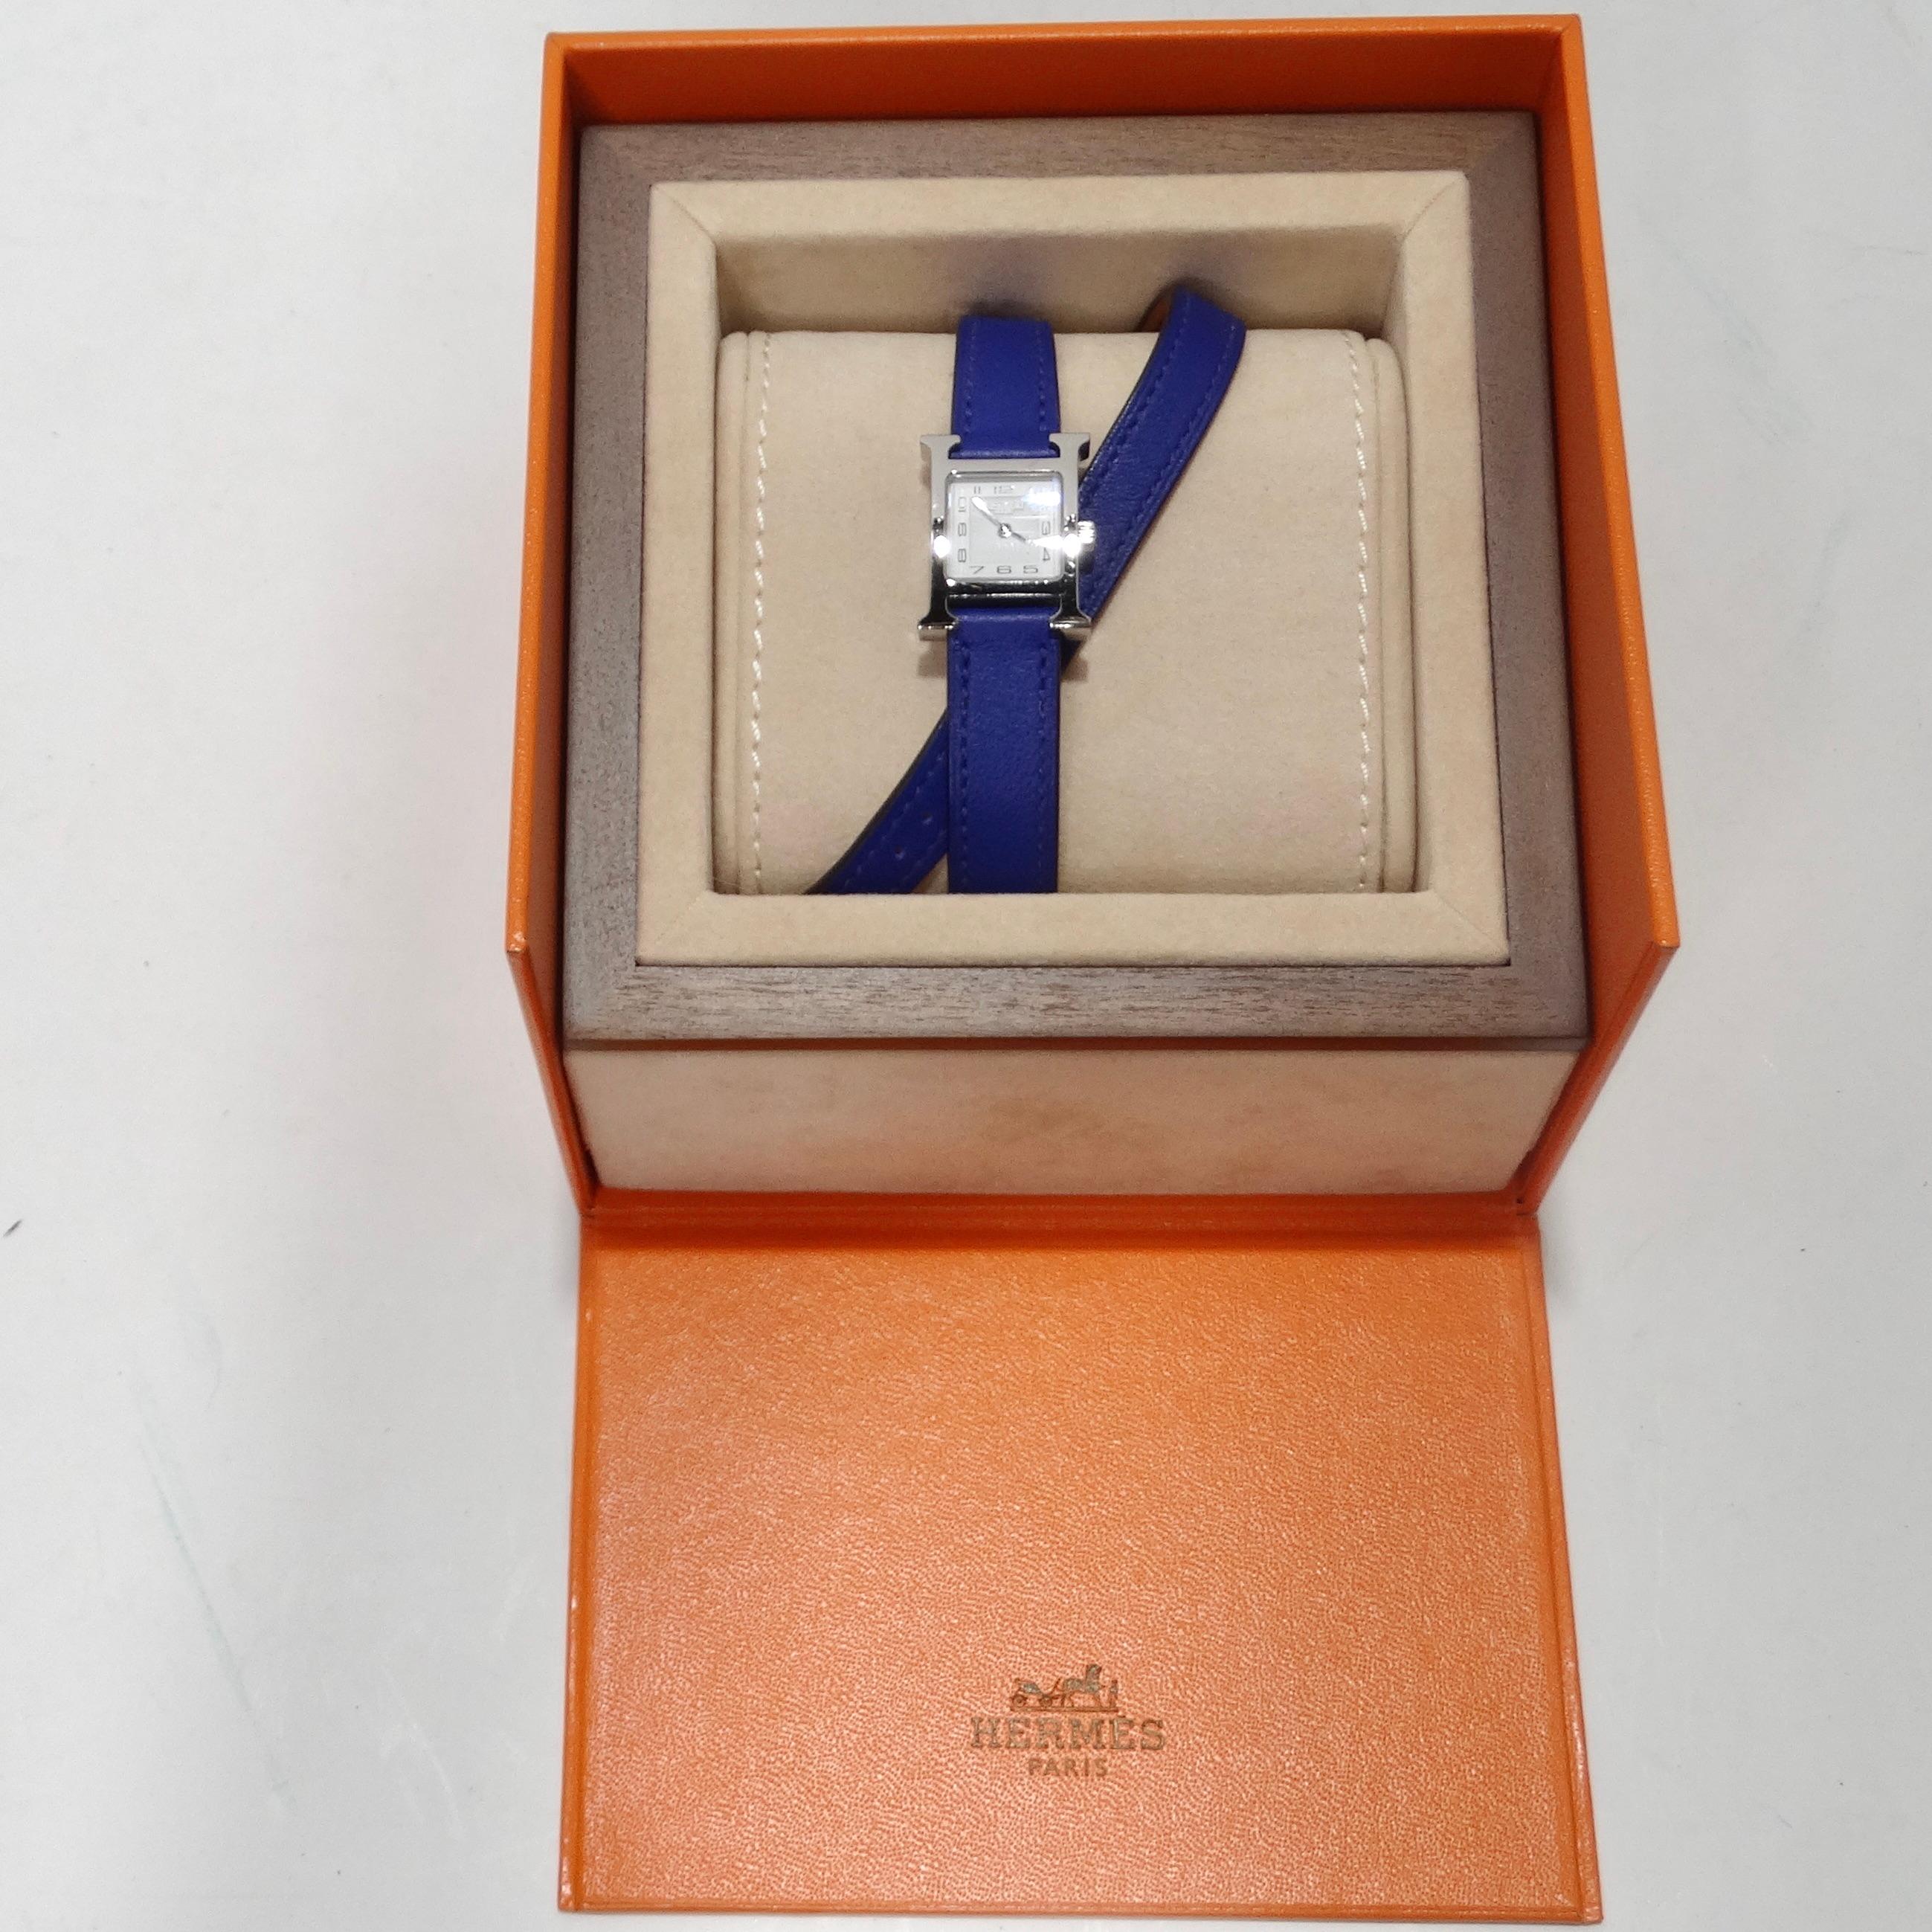 Introducing the Hermes Heure H Hour Double Tour Quartz Watch, a timepiece that beautifully blends unique style, a vibrant modern twist, and the exquisite craftsmanship that Hermes is renowned for. The 